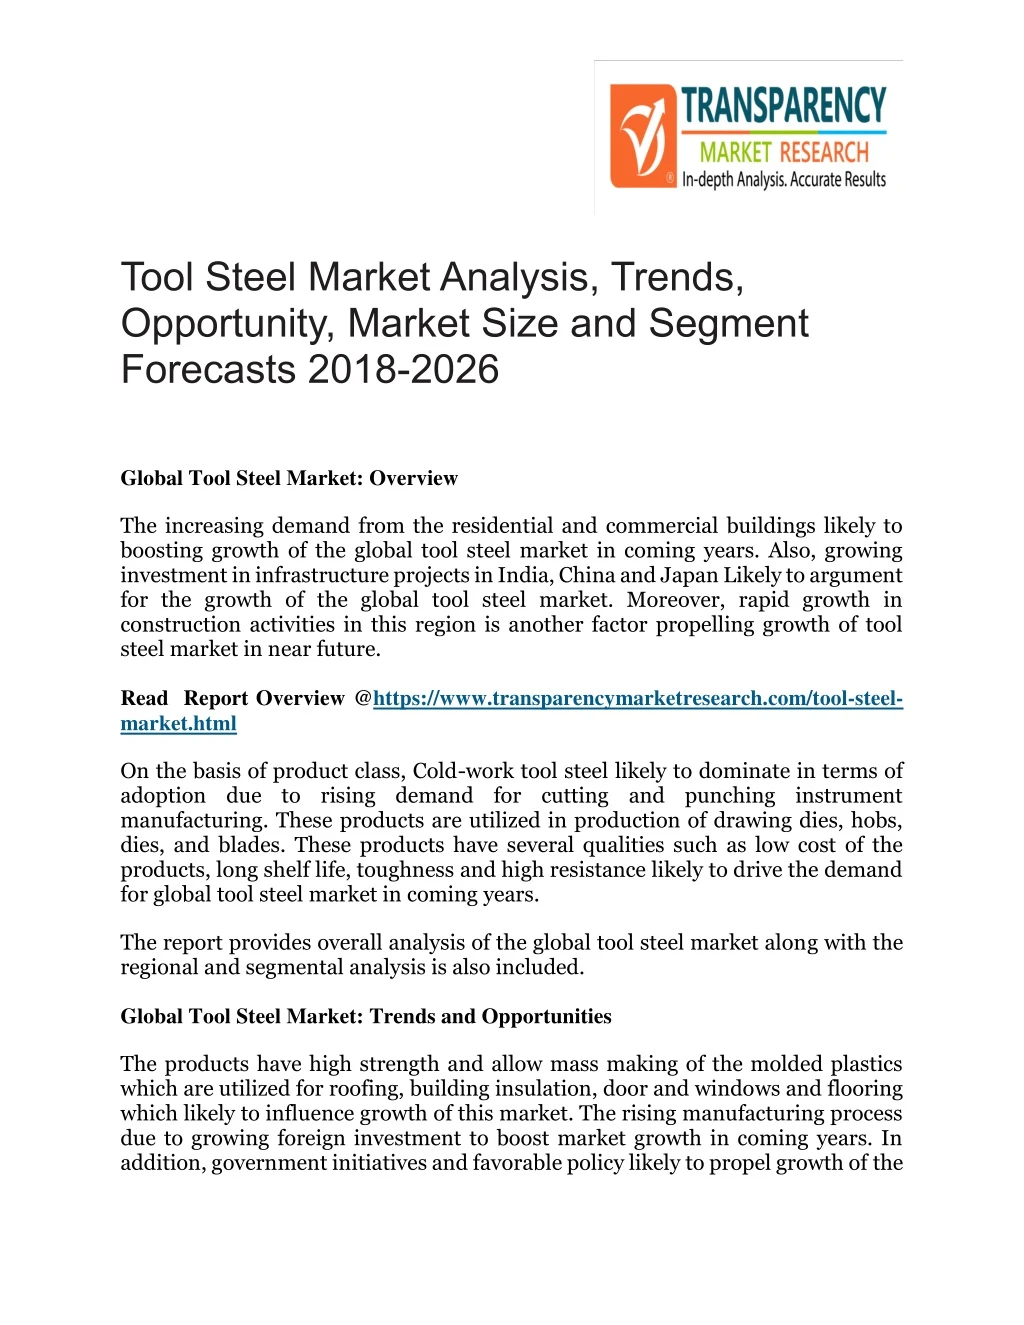 tool steel market analysis trends opportunity